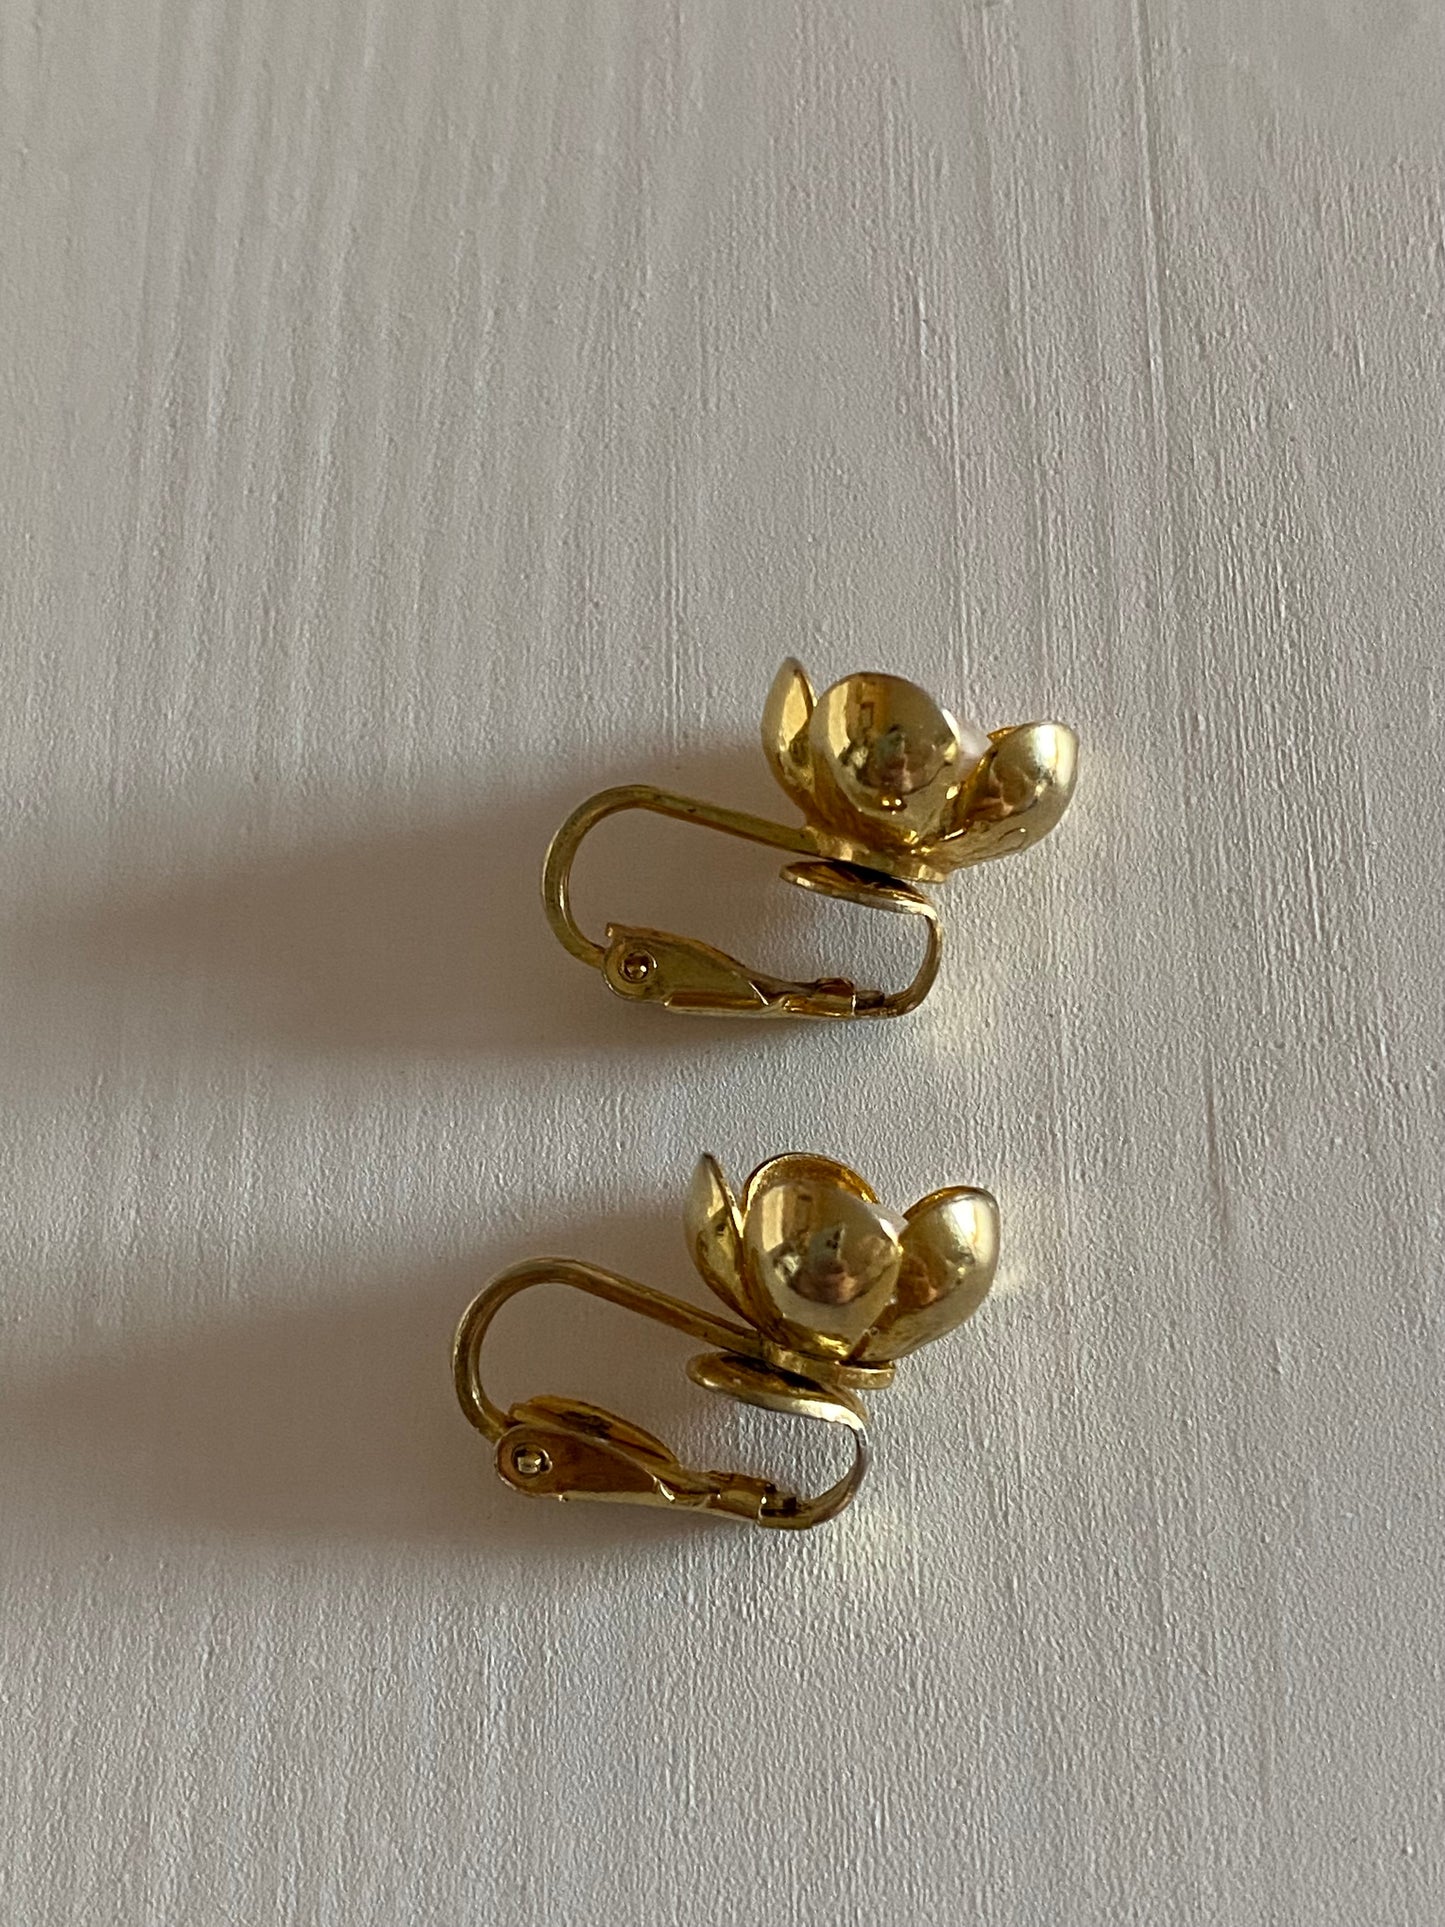 Vintage Flower and Pearl Clip-On Earrings